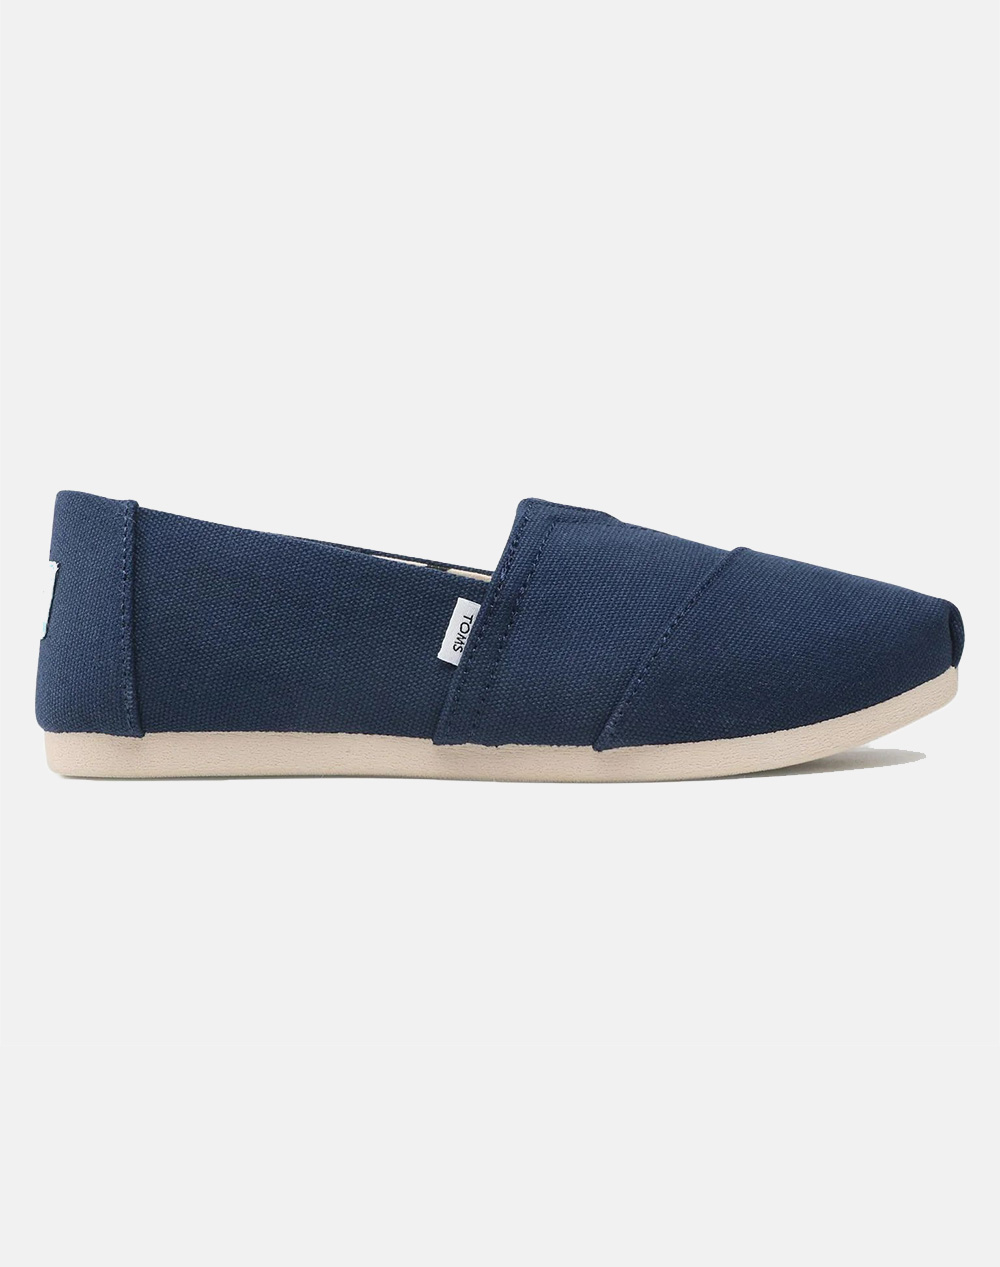 TOMS NVY RECYCLED COT CAN WM ALPR ESP 10017712-NVY NavyBlue